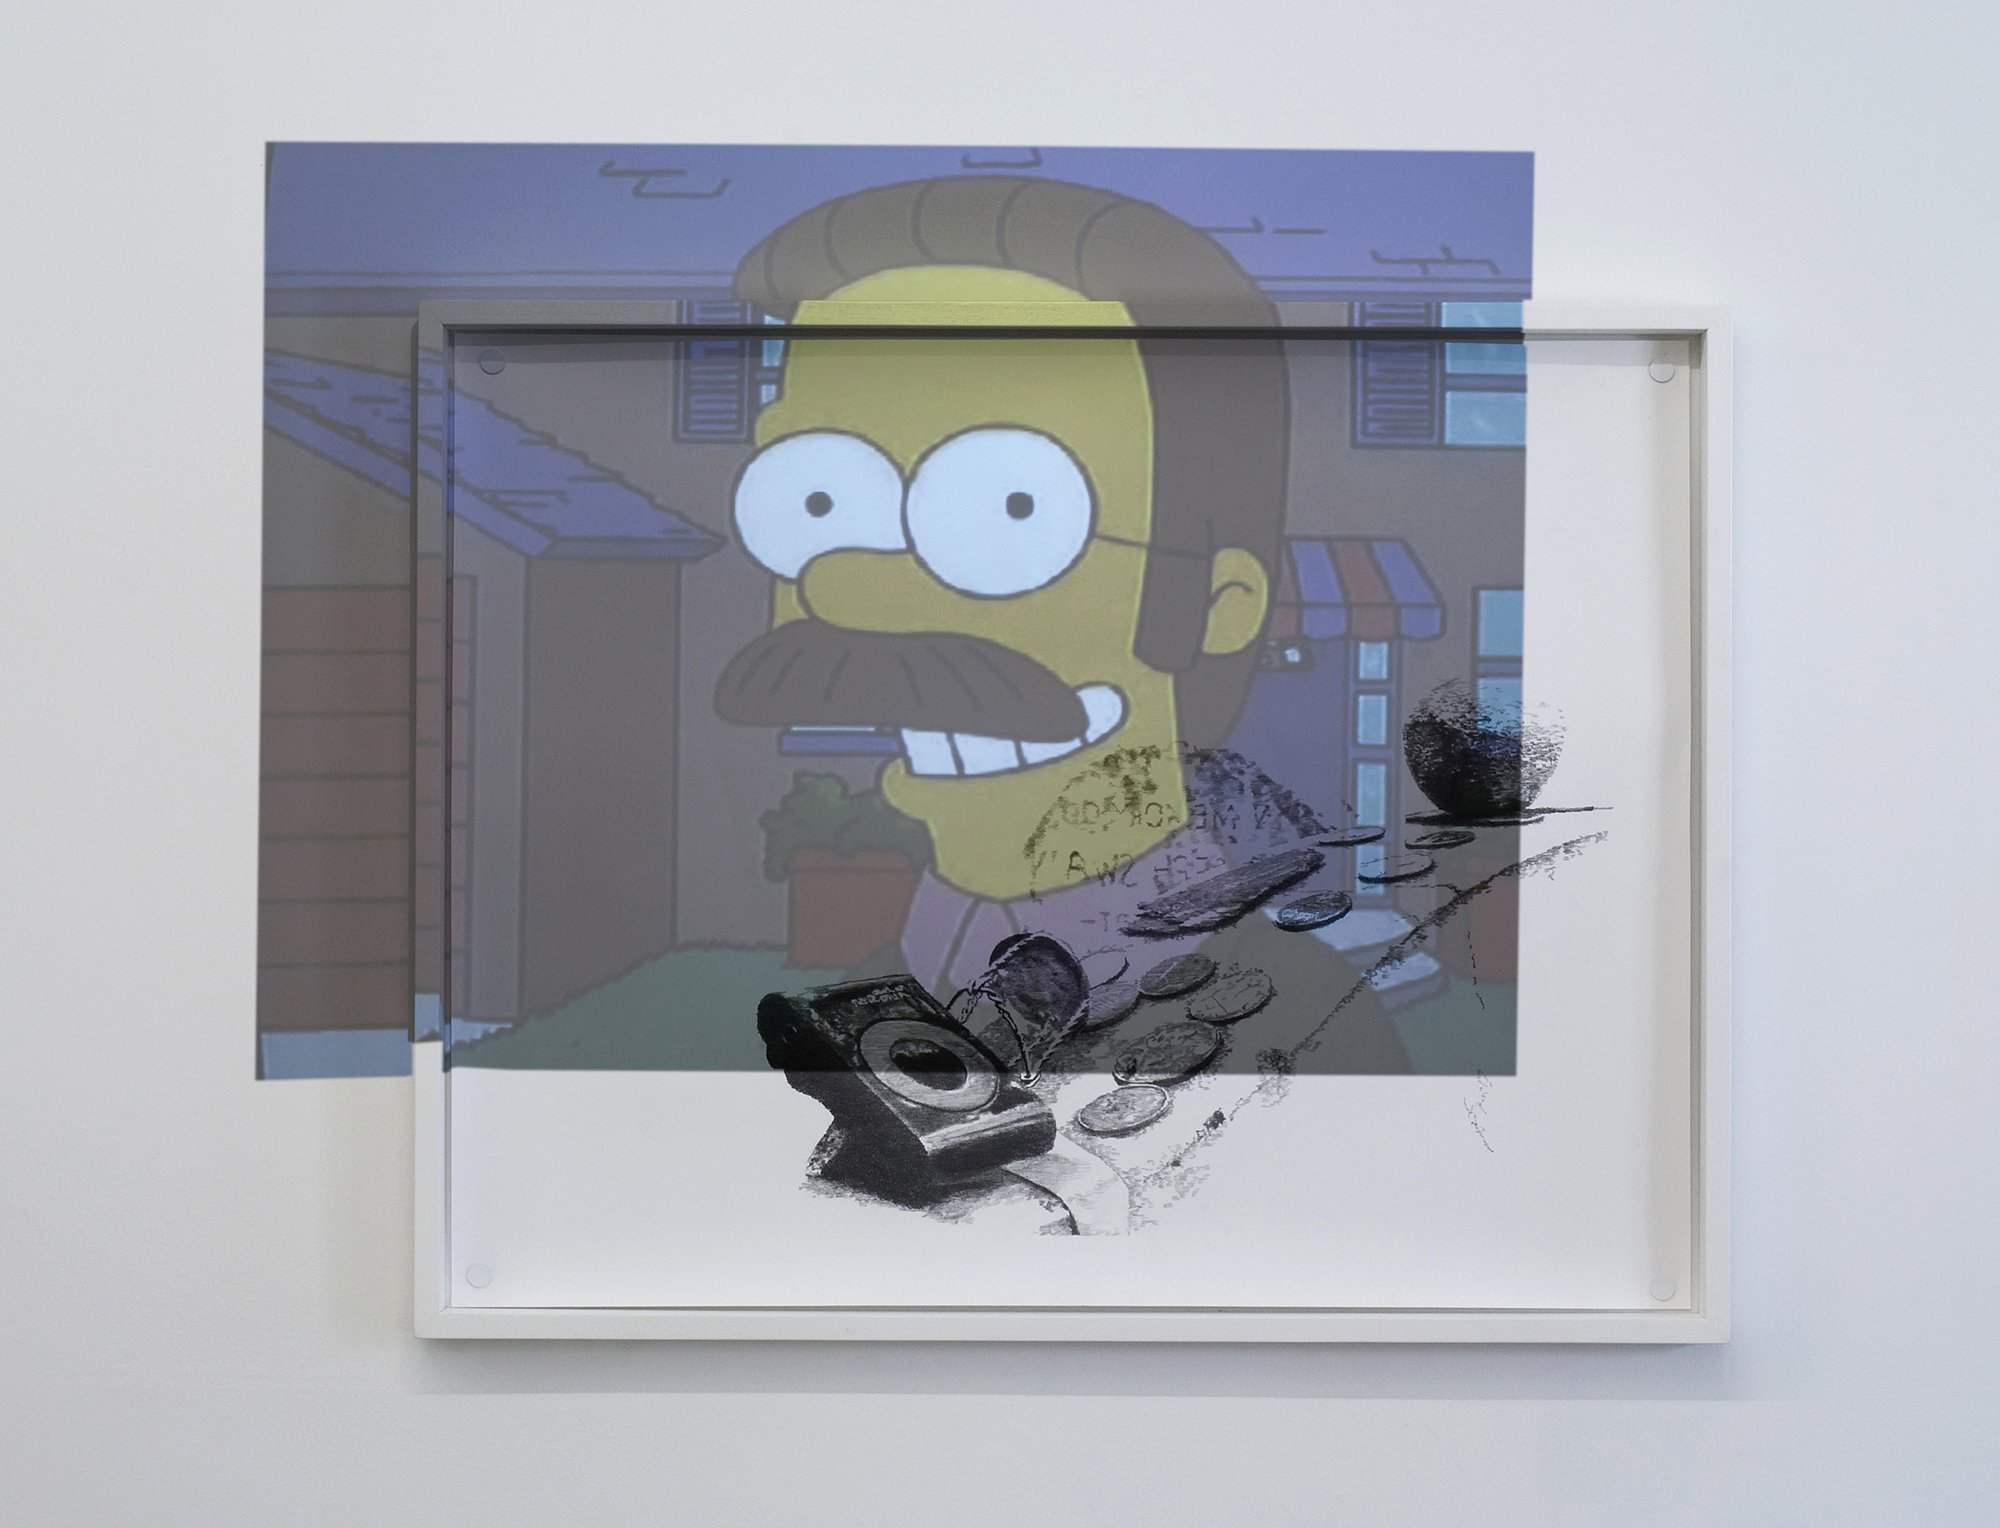 Mark Aerial Waller, Offering Transmissions #3, graphite on paper, projection of recent episode of The Simpsons, 100 x 78 cm (39 3/8 x 30 3/4 in), 2011 – 2012